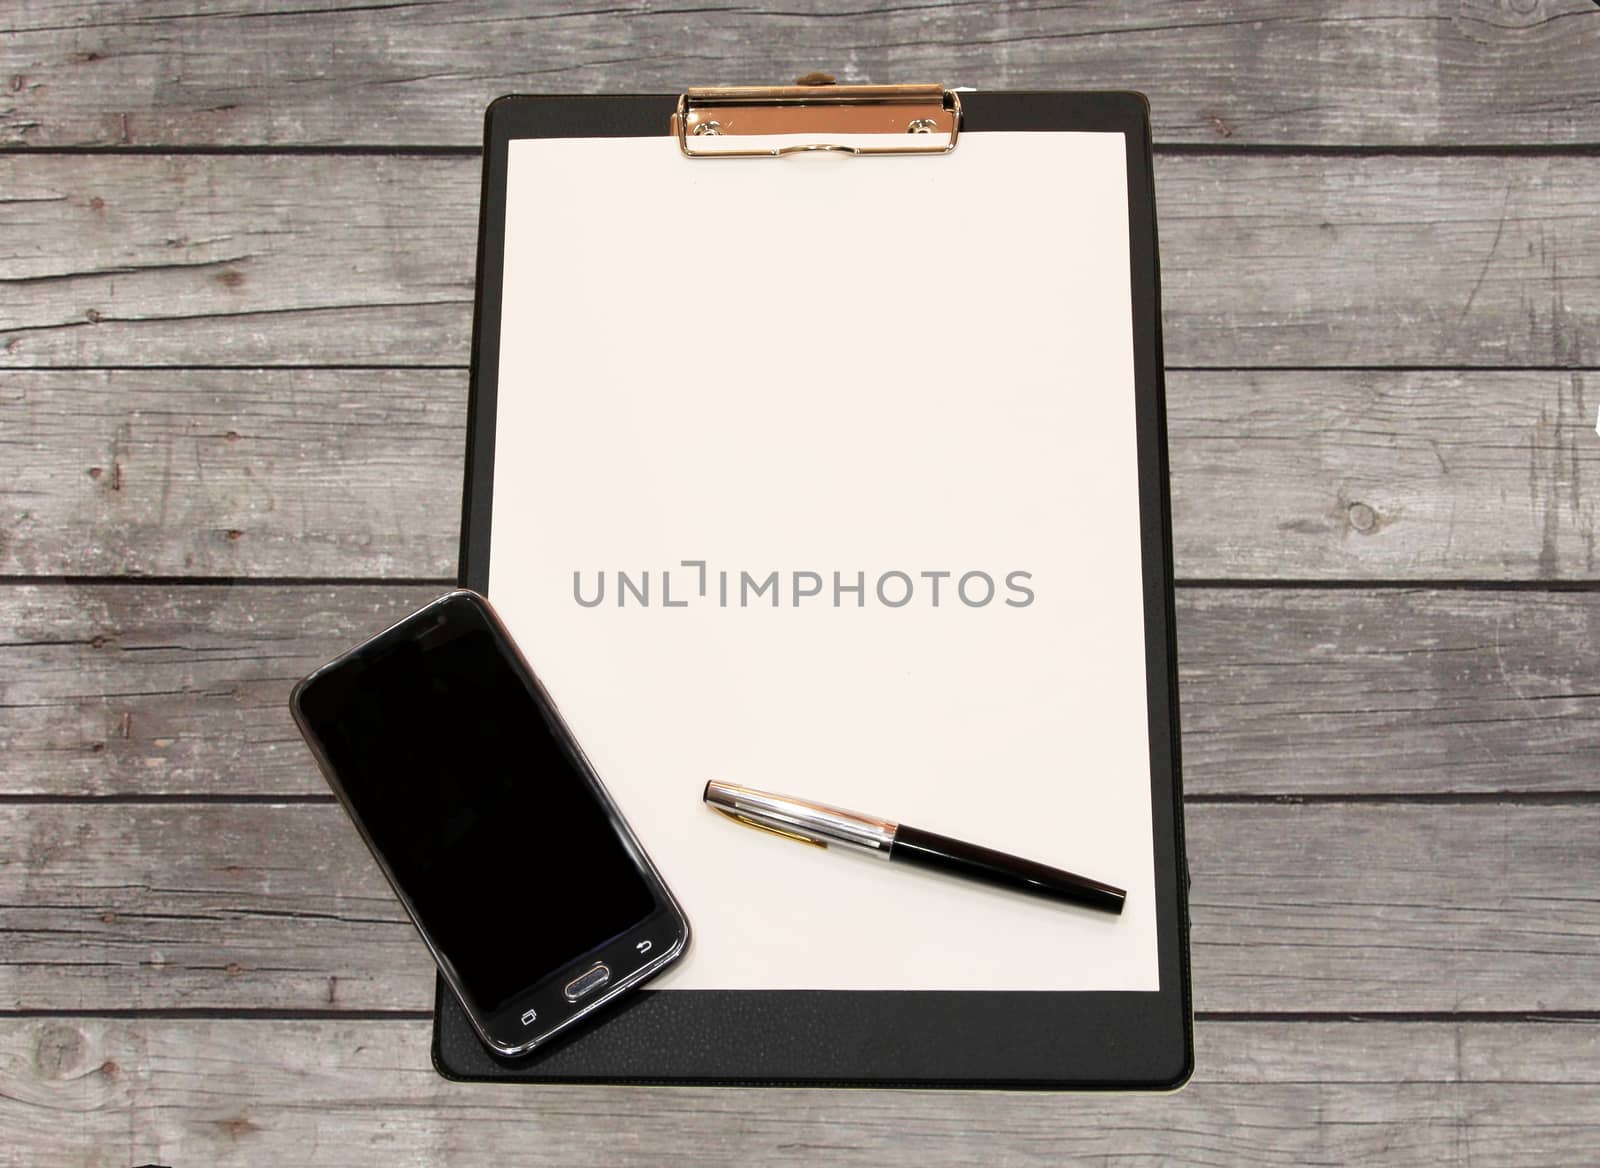 A white sheet of paper with a pen and smartphone on a wooden table made of grey Board